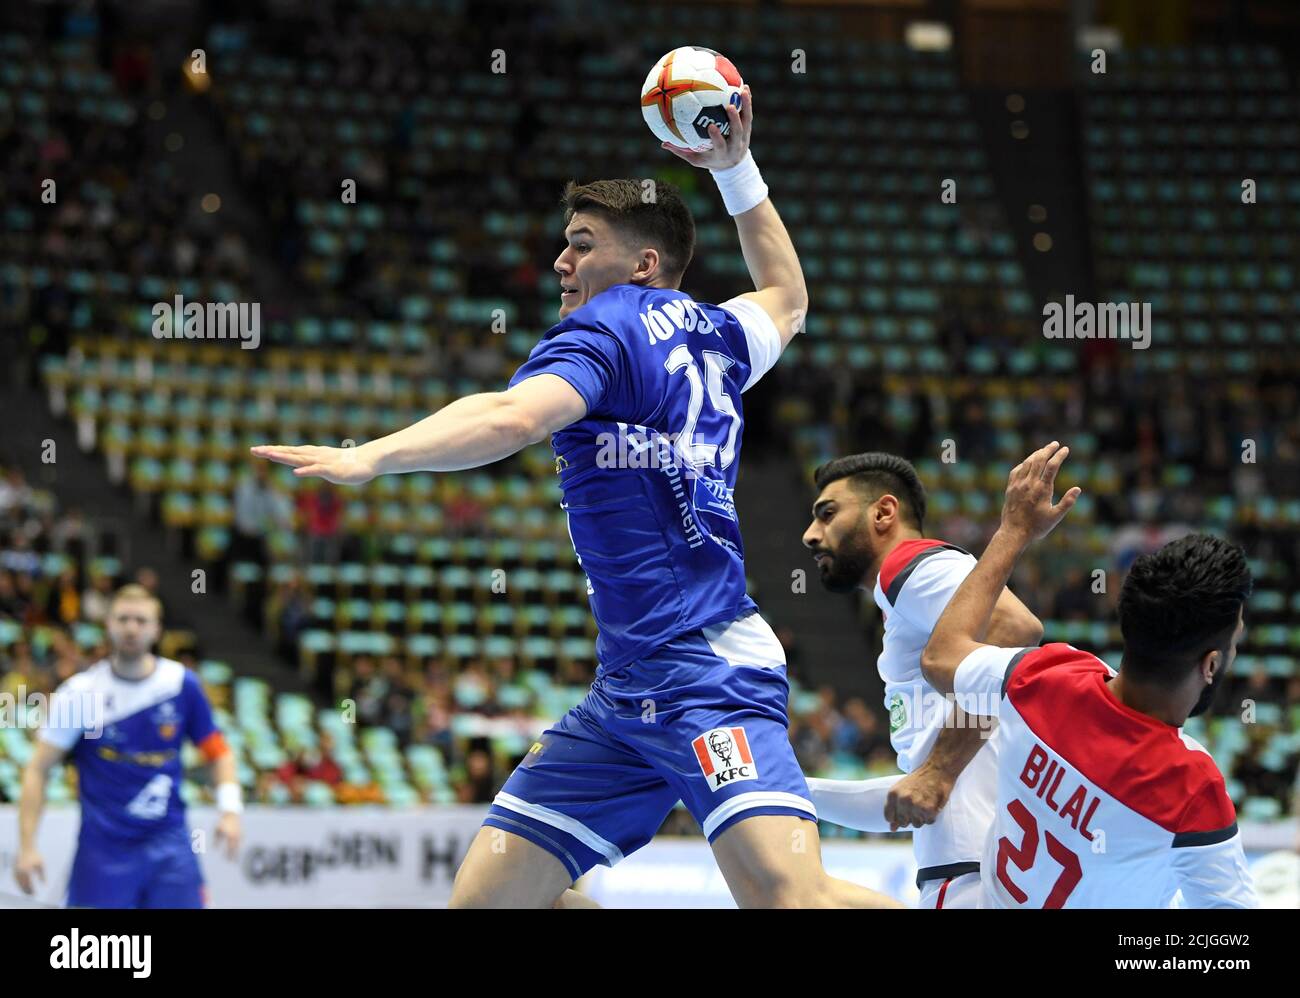 World Championship - Germany & Denmark 2019 - B - Iceland v Bahrain - Olympiahalle, Munich, Germany - January 14, 2019 Iceland's Orn Jonsson in action REUTERS/Andreas Gebert Stock Photo - Alamy